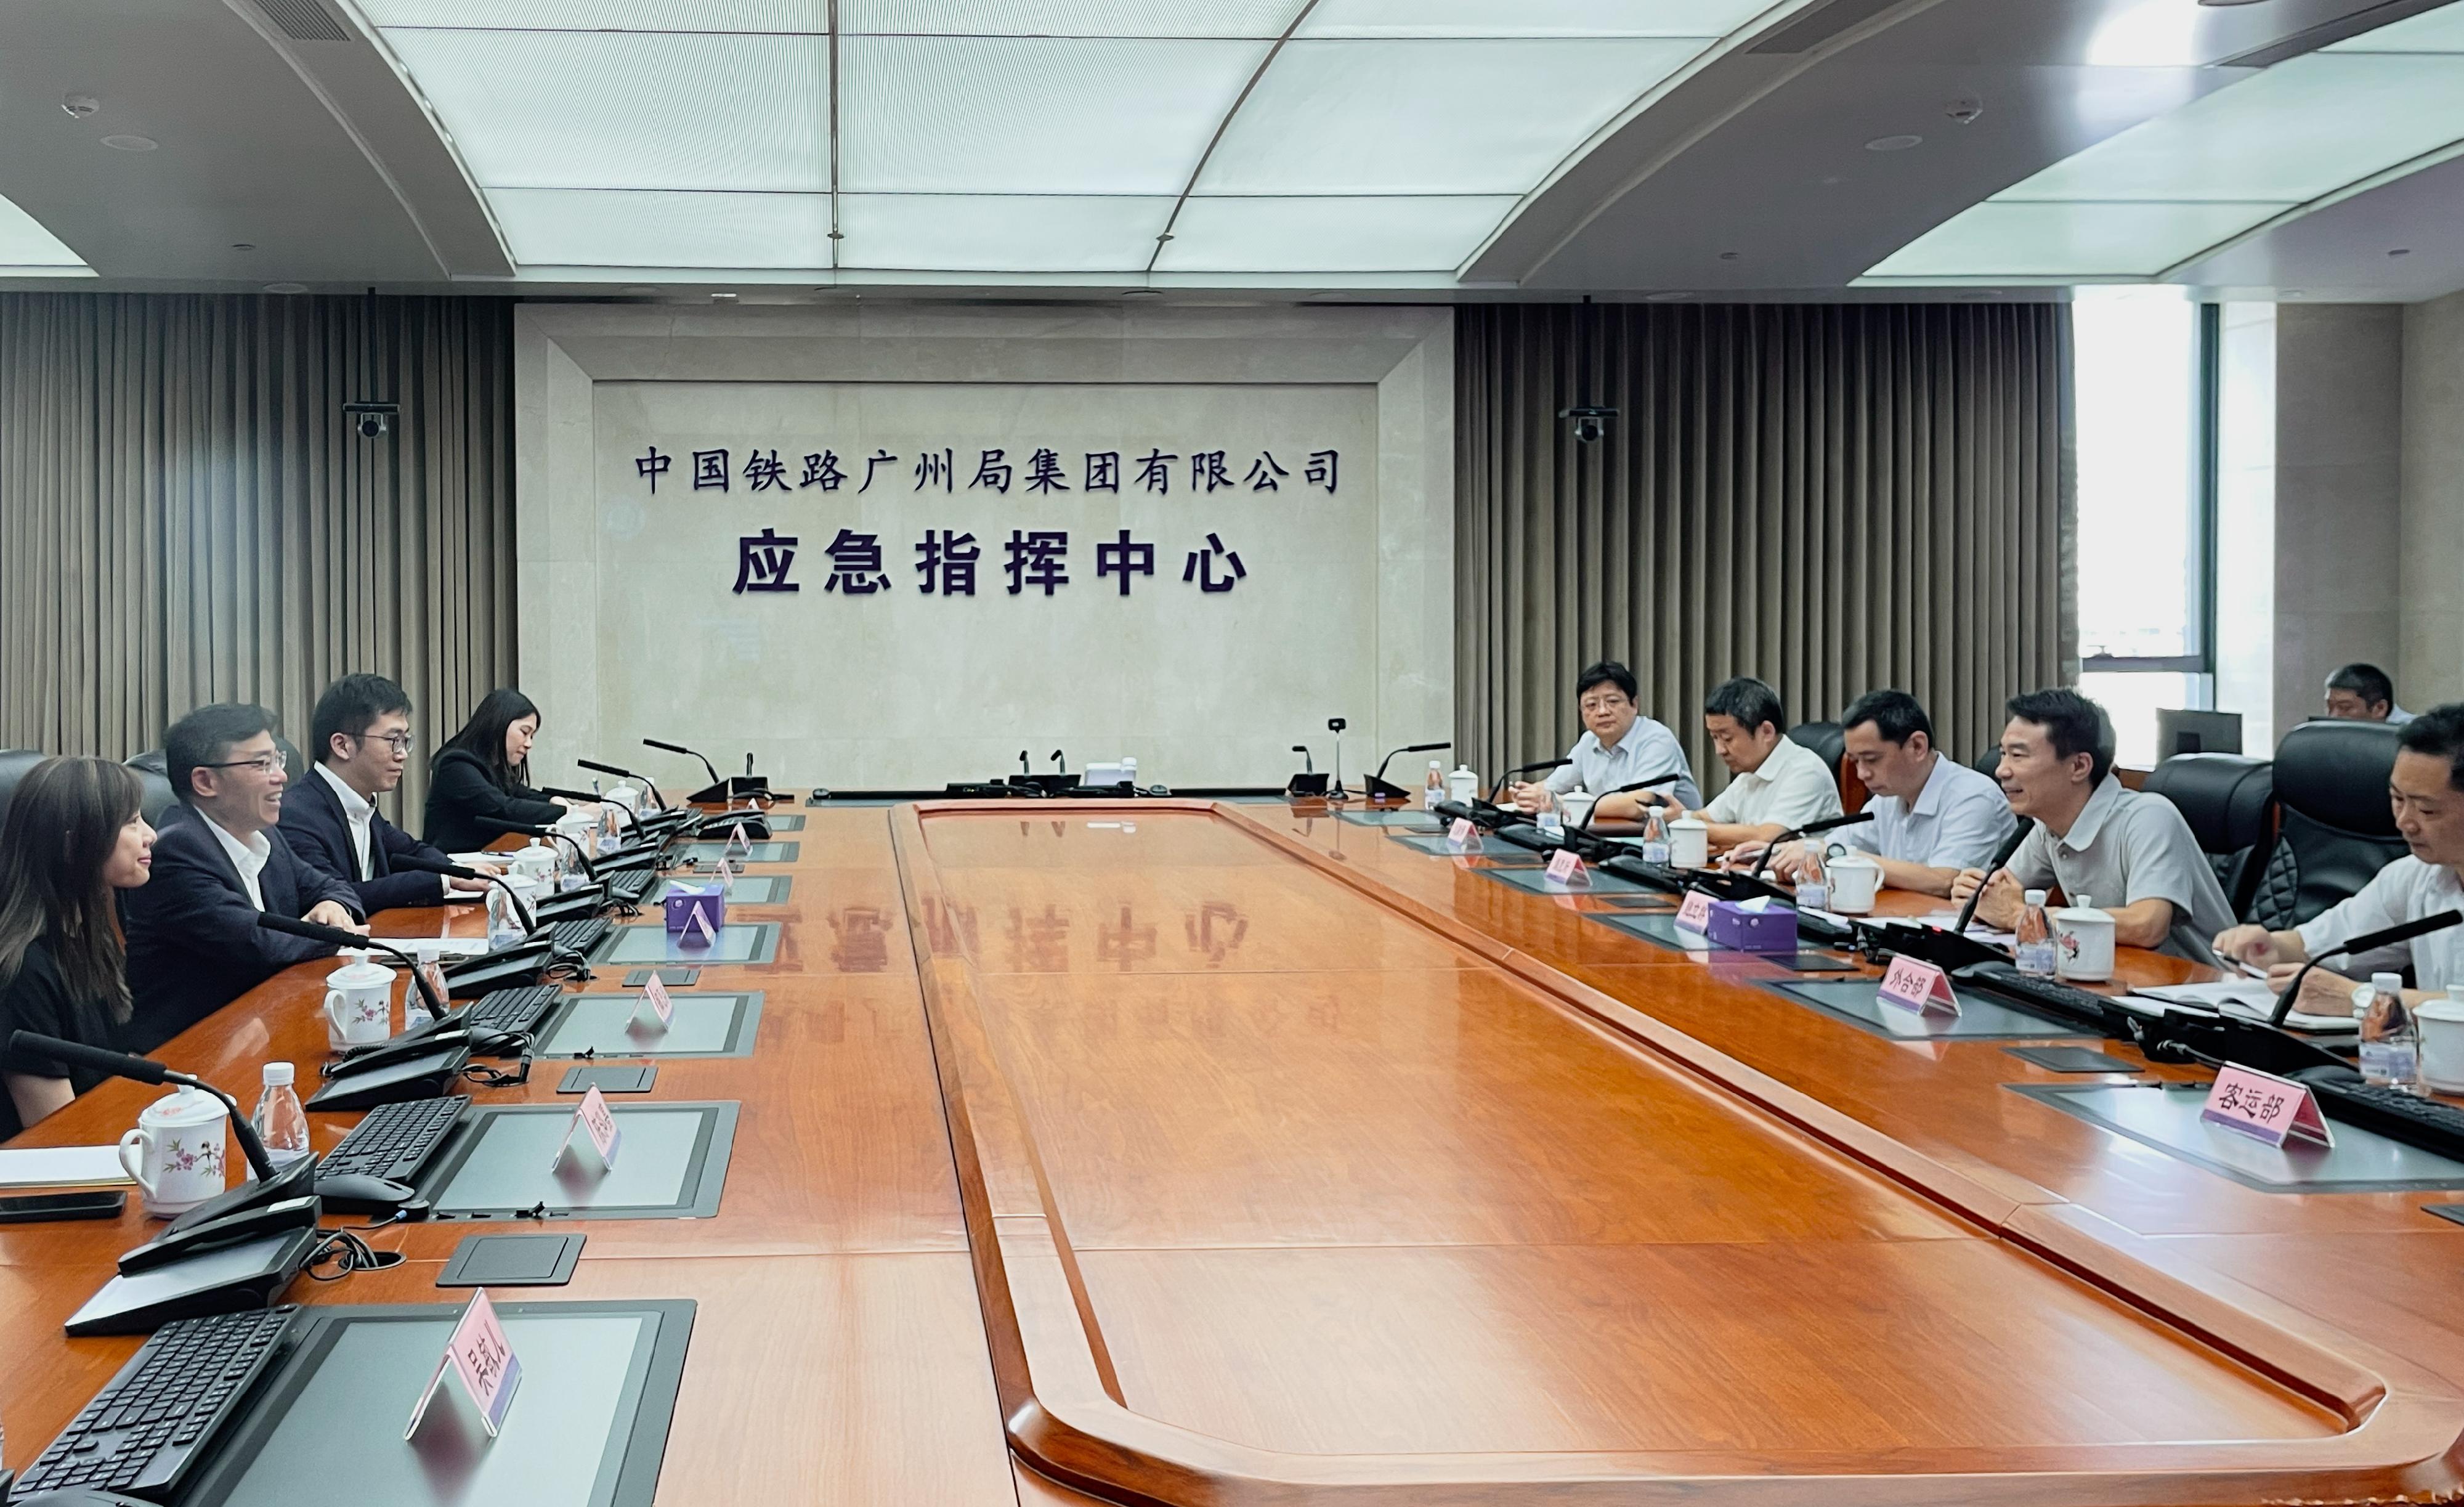 The Secretary for Transport and Logistics, Mr Lam Sai-hung, began a two-day visit to Guangzhou today (September 20) to better understand the latest developments in smart mobility there and to explore new opportunities for win-win co-operation in further promoting the interconnection and interoperability of transport networks in the Guangdong-Hong Kong-Macao Greater Bay Area. Photo shows Mr Lam (second left) meeting with Deputy General Manager of the China Railway Guangzhou Group Mr Bao Liqun (second right) to exchange views on how to further improve the High Speed Rail service.